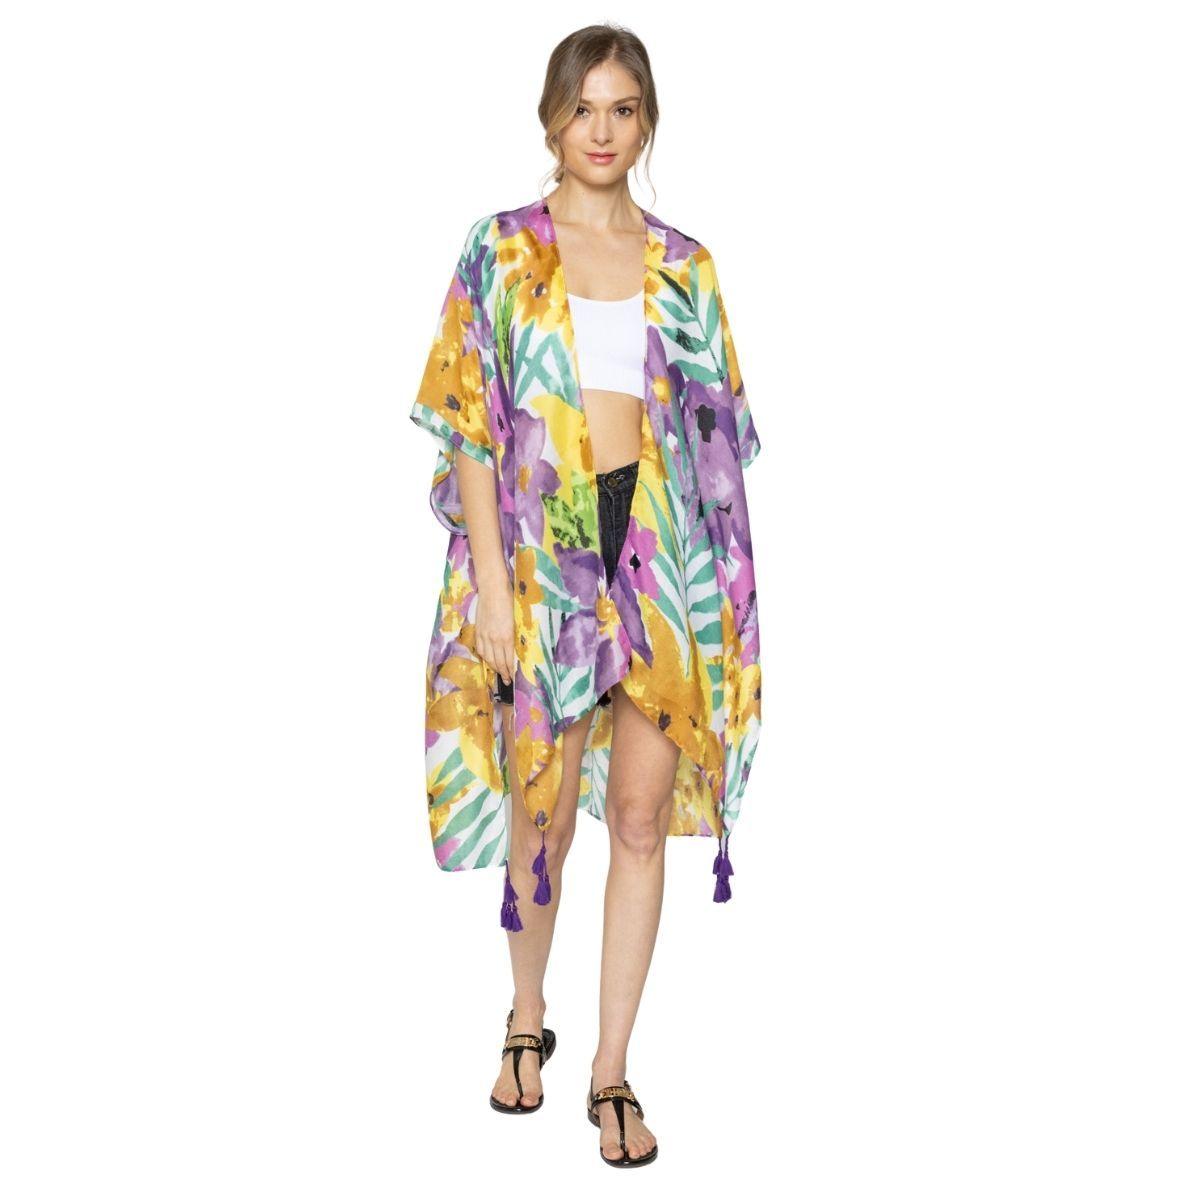 Get Ready for Spring with a Multicolor Tempera Floral Kimono - Shop Now!